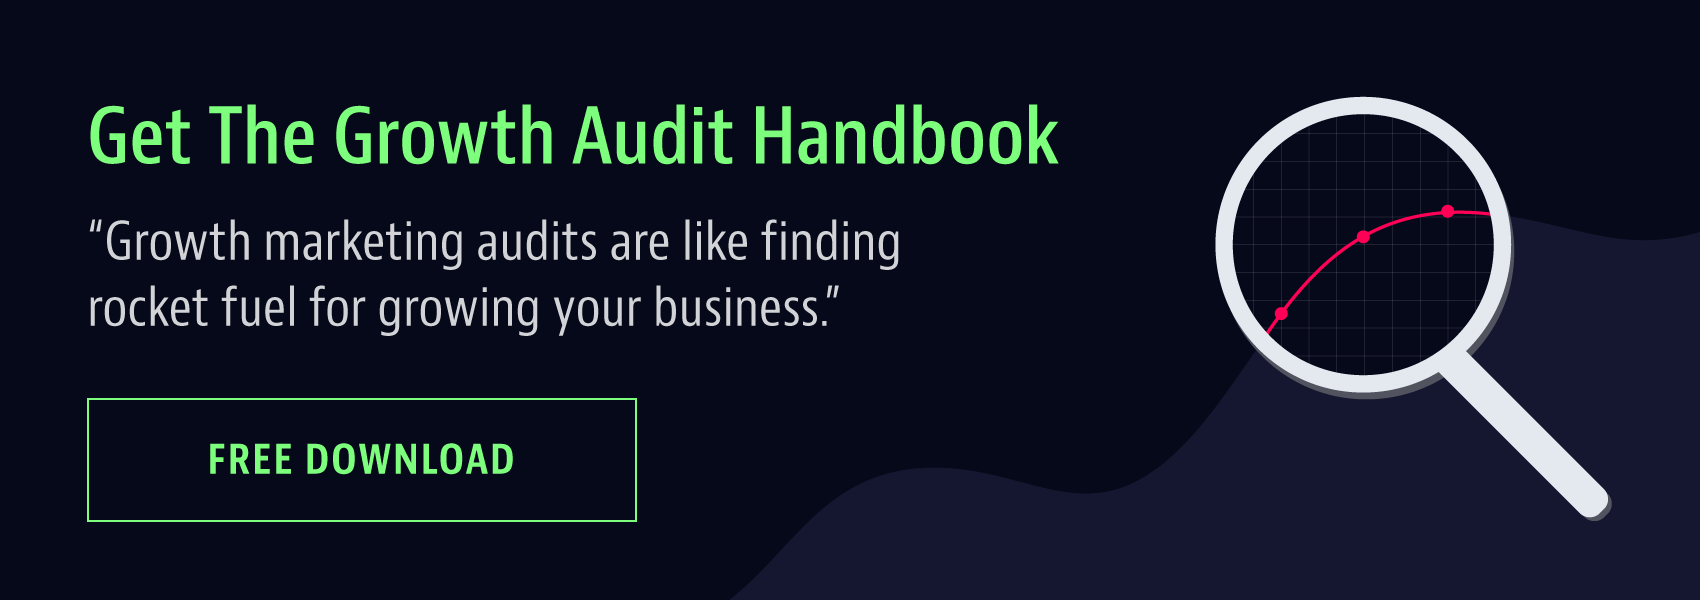 get the growth audit handbook free download - instagram followers growth hack